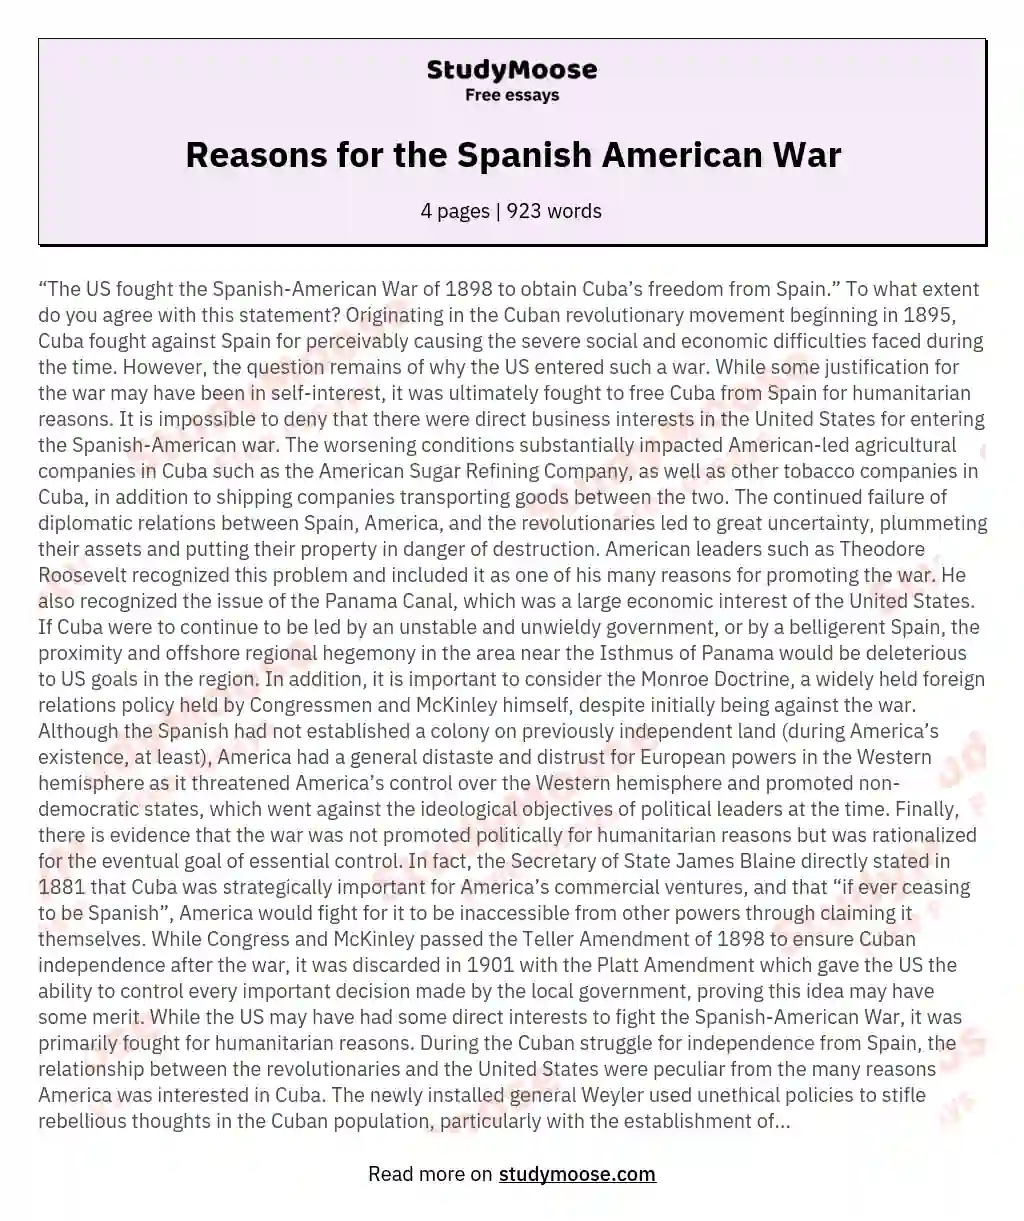 Reasons for the Spanish American War essay